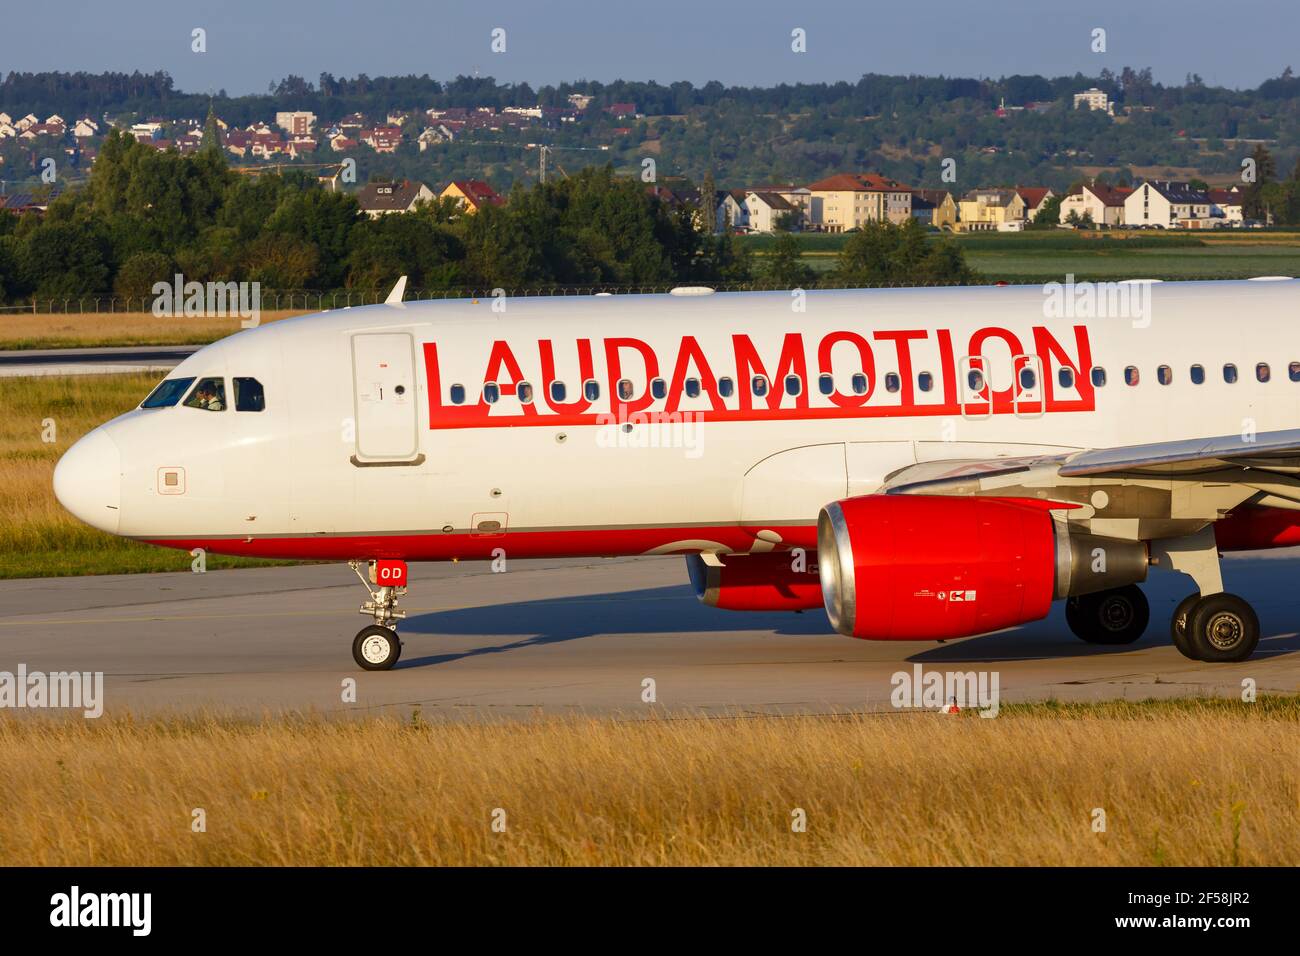 Stuttgart, Germany - June 22, 2018: A LaudaMotion Airbus A320 airplane at Stuttgart airport (STR) in Germany. Airbus is a European aircraft manufactur Stock Photo